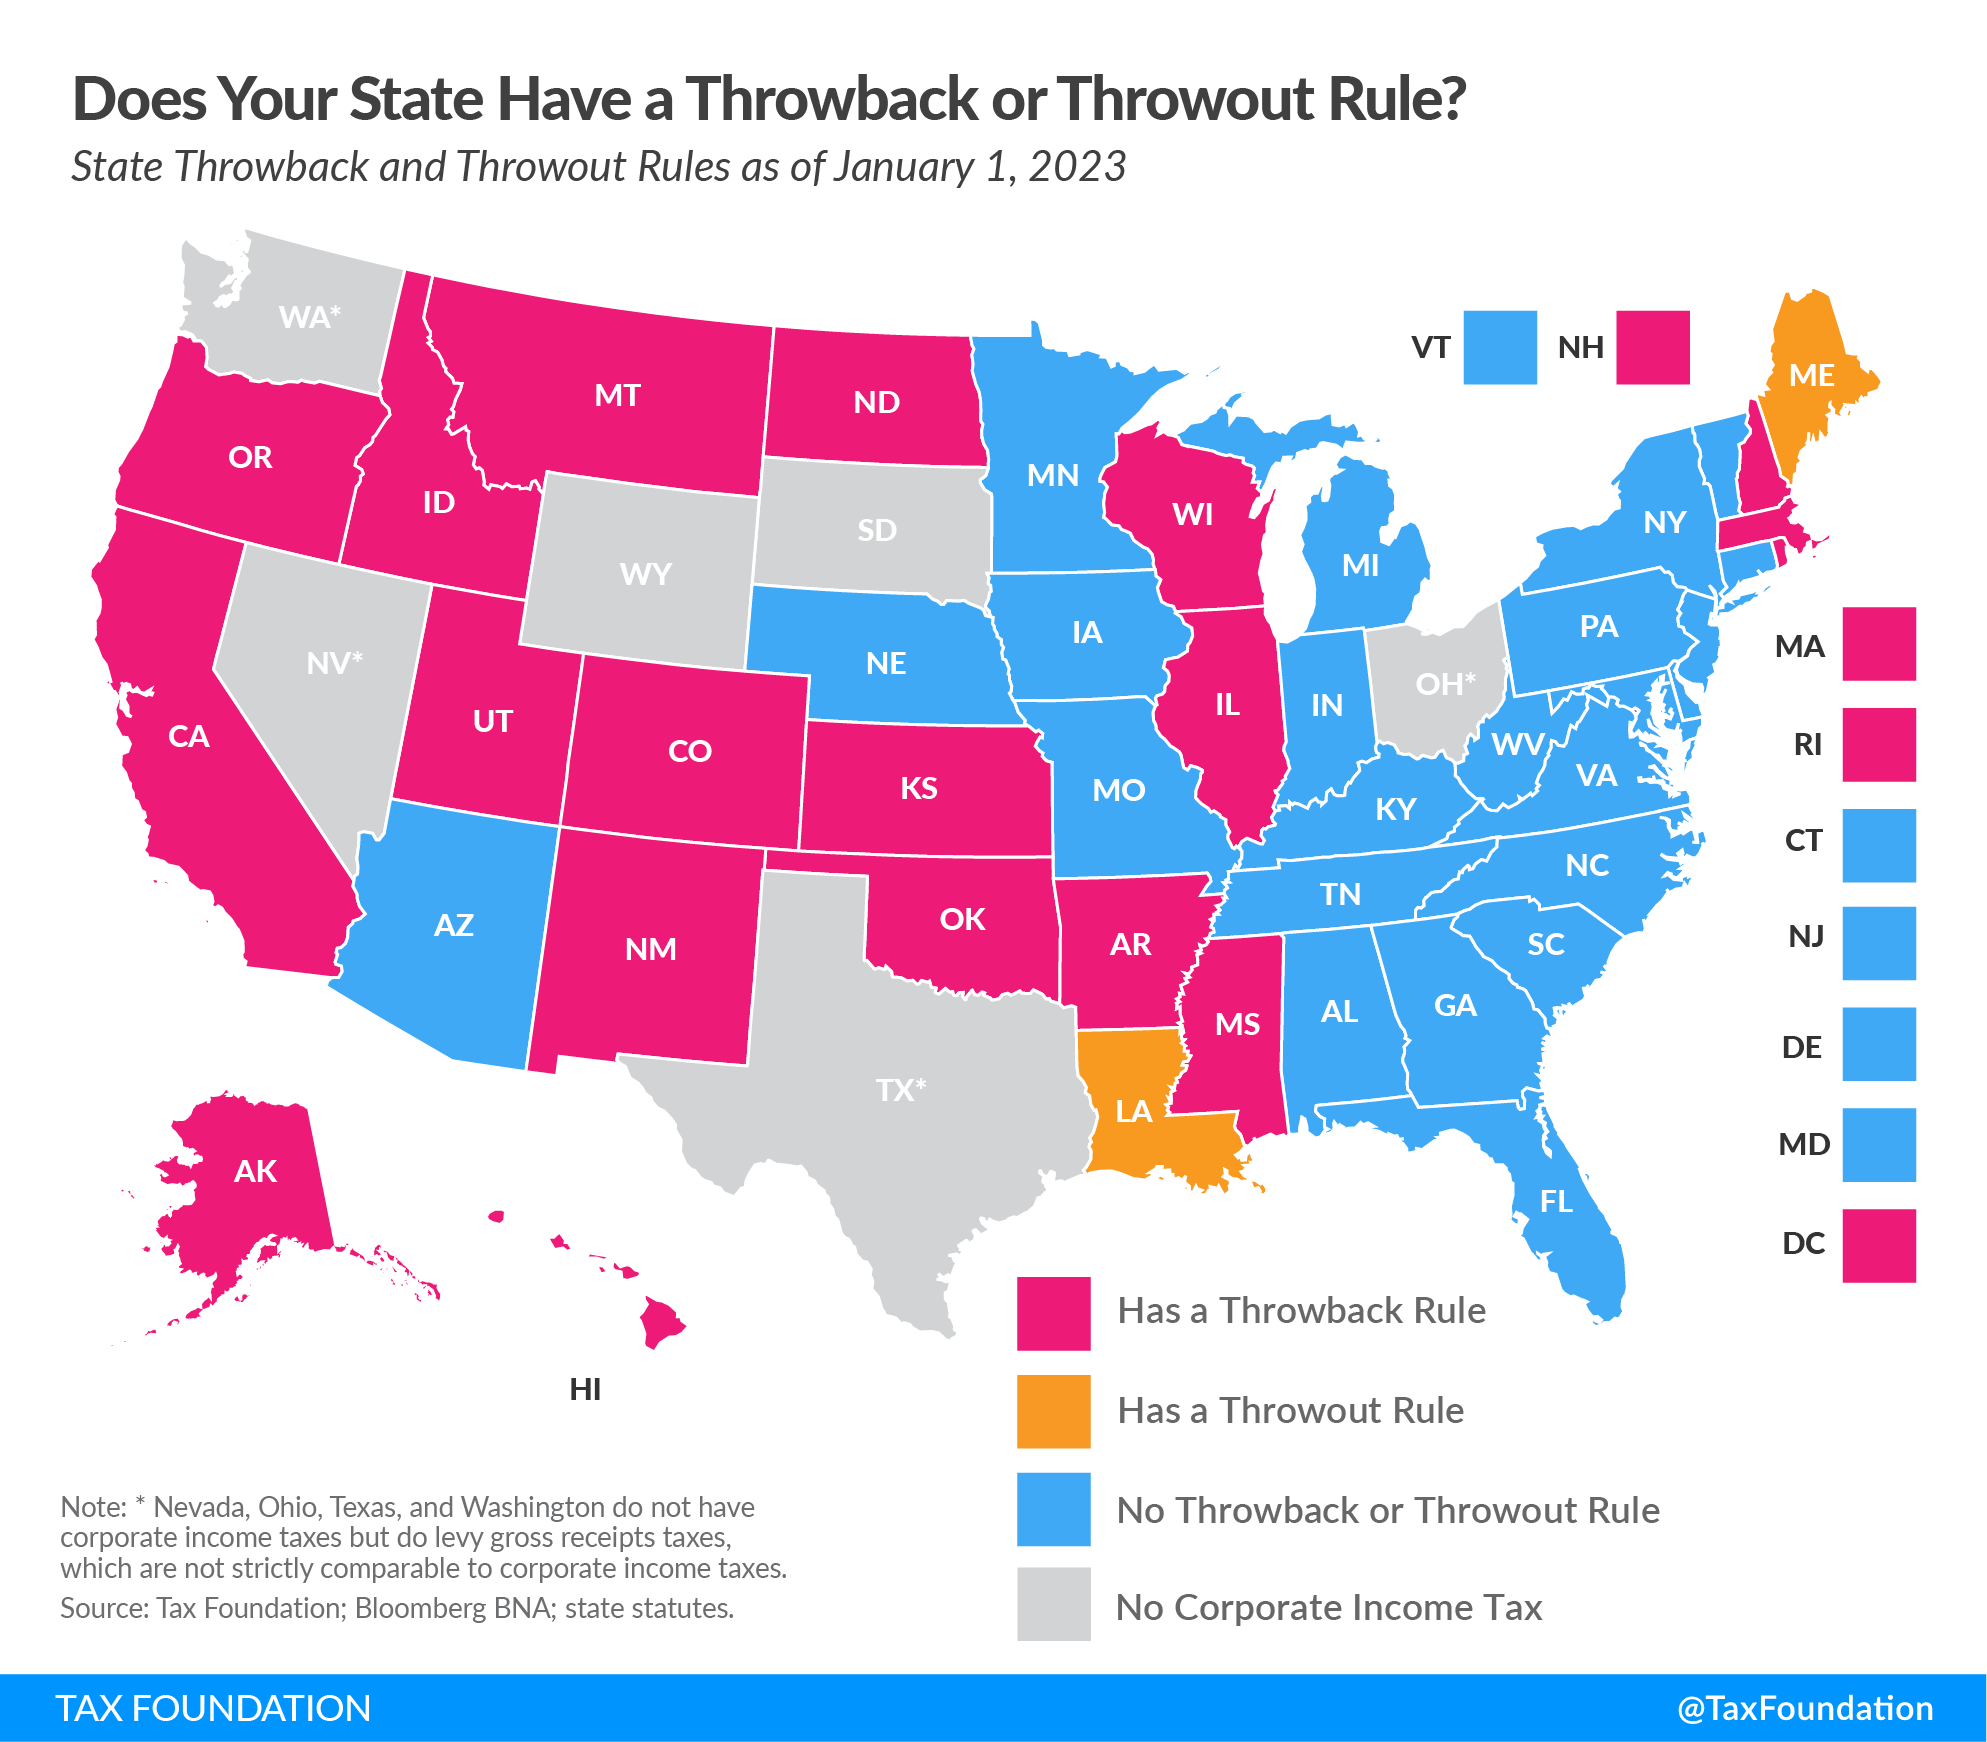 State throwback rule data and state throwout rule data as of 2023